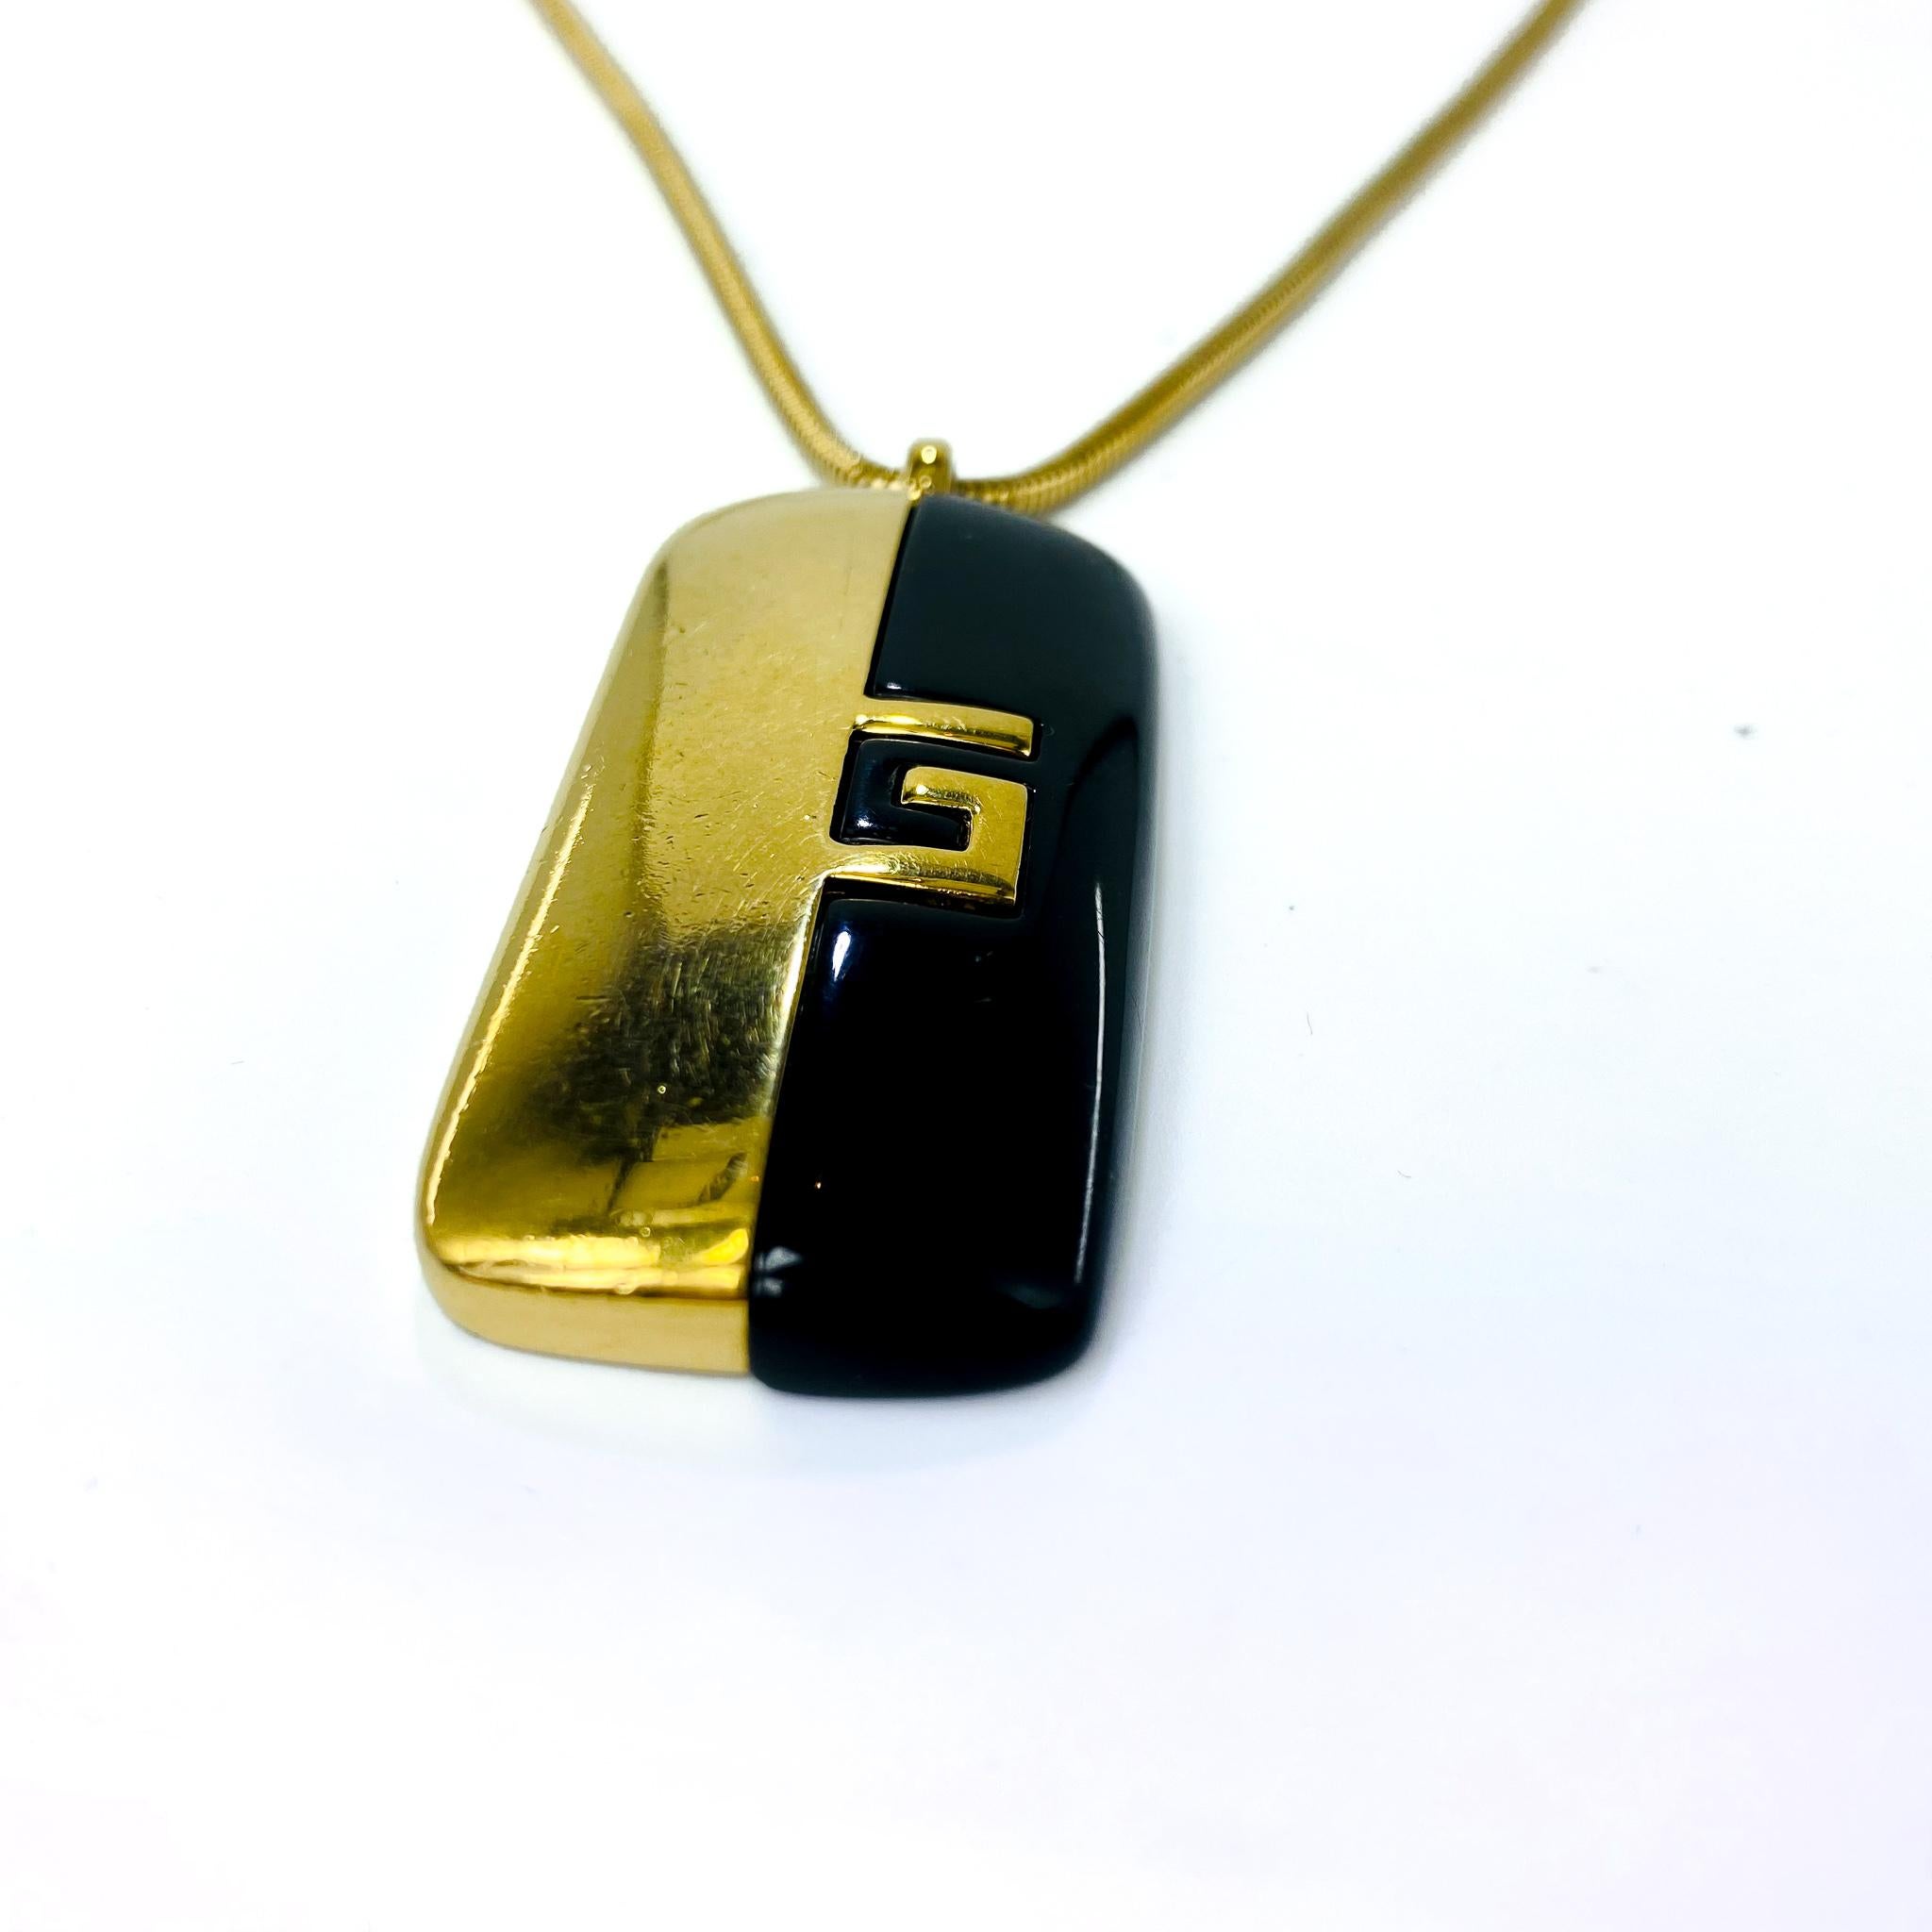 Vintage Givenchy Gold Plated Pendant Necklace 1970s

Super cool pendant necklace from the iconic Hubert de Givenchy. Made in France in the 1970s, this incredible necklace has a gold plated fine snake chain with a rectangular black resin and gold